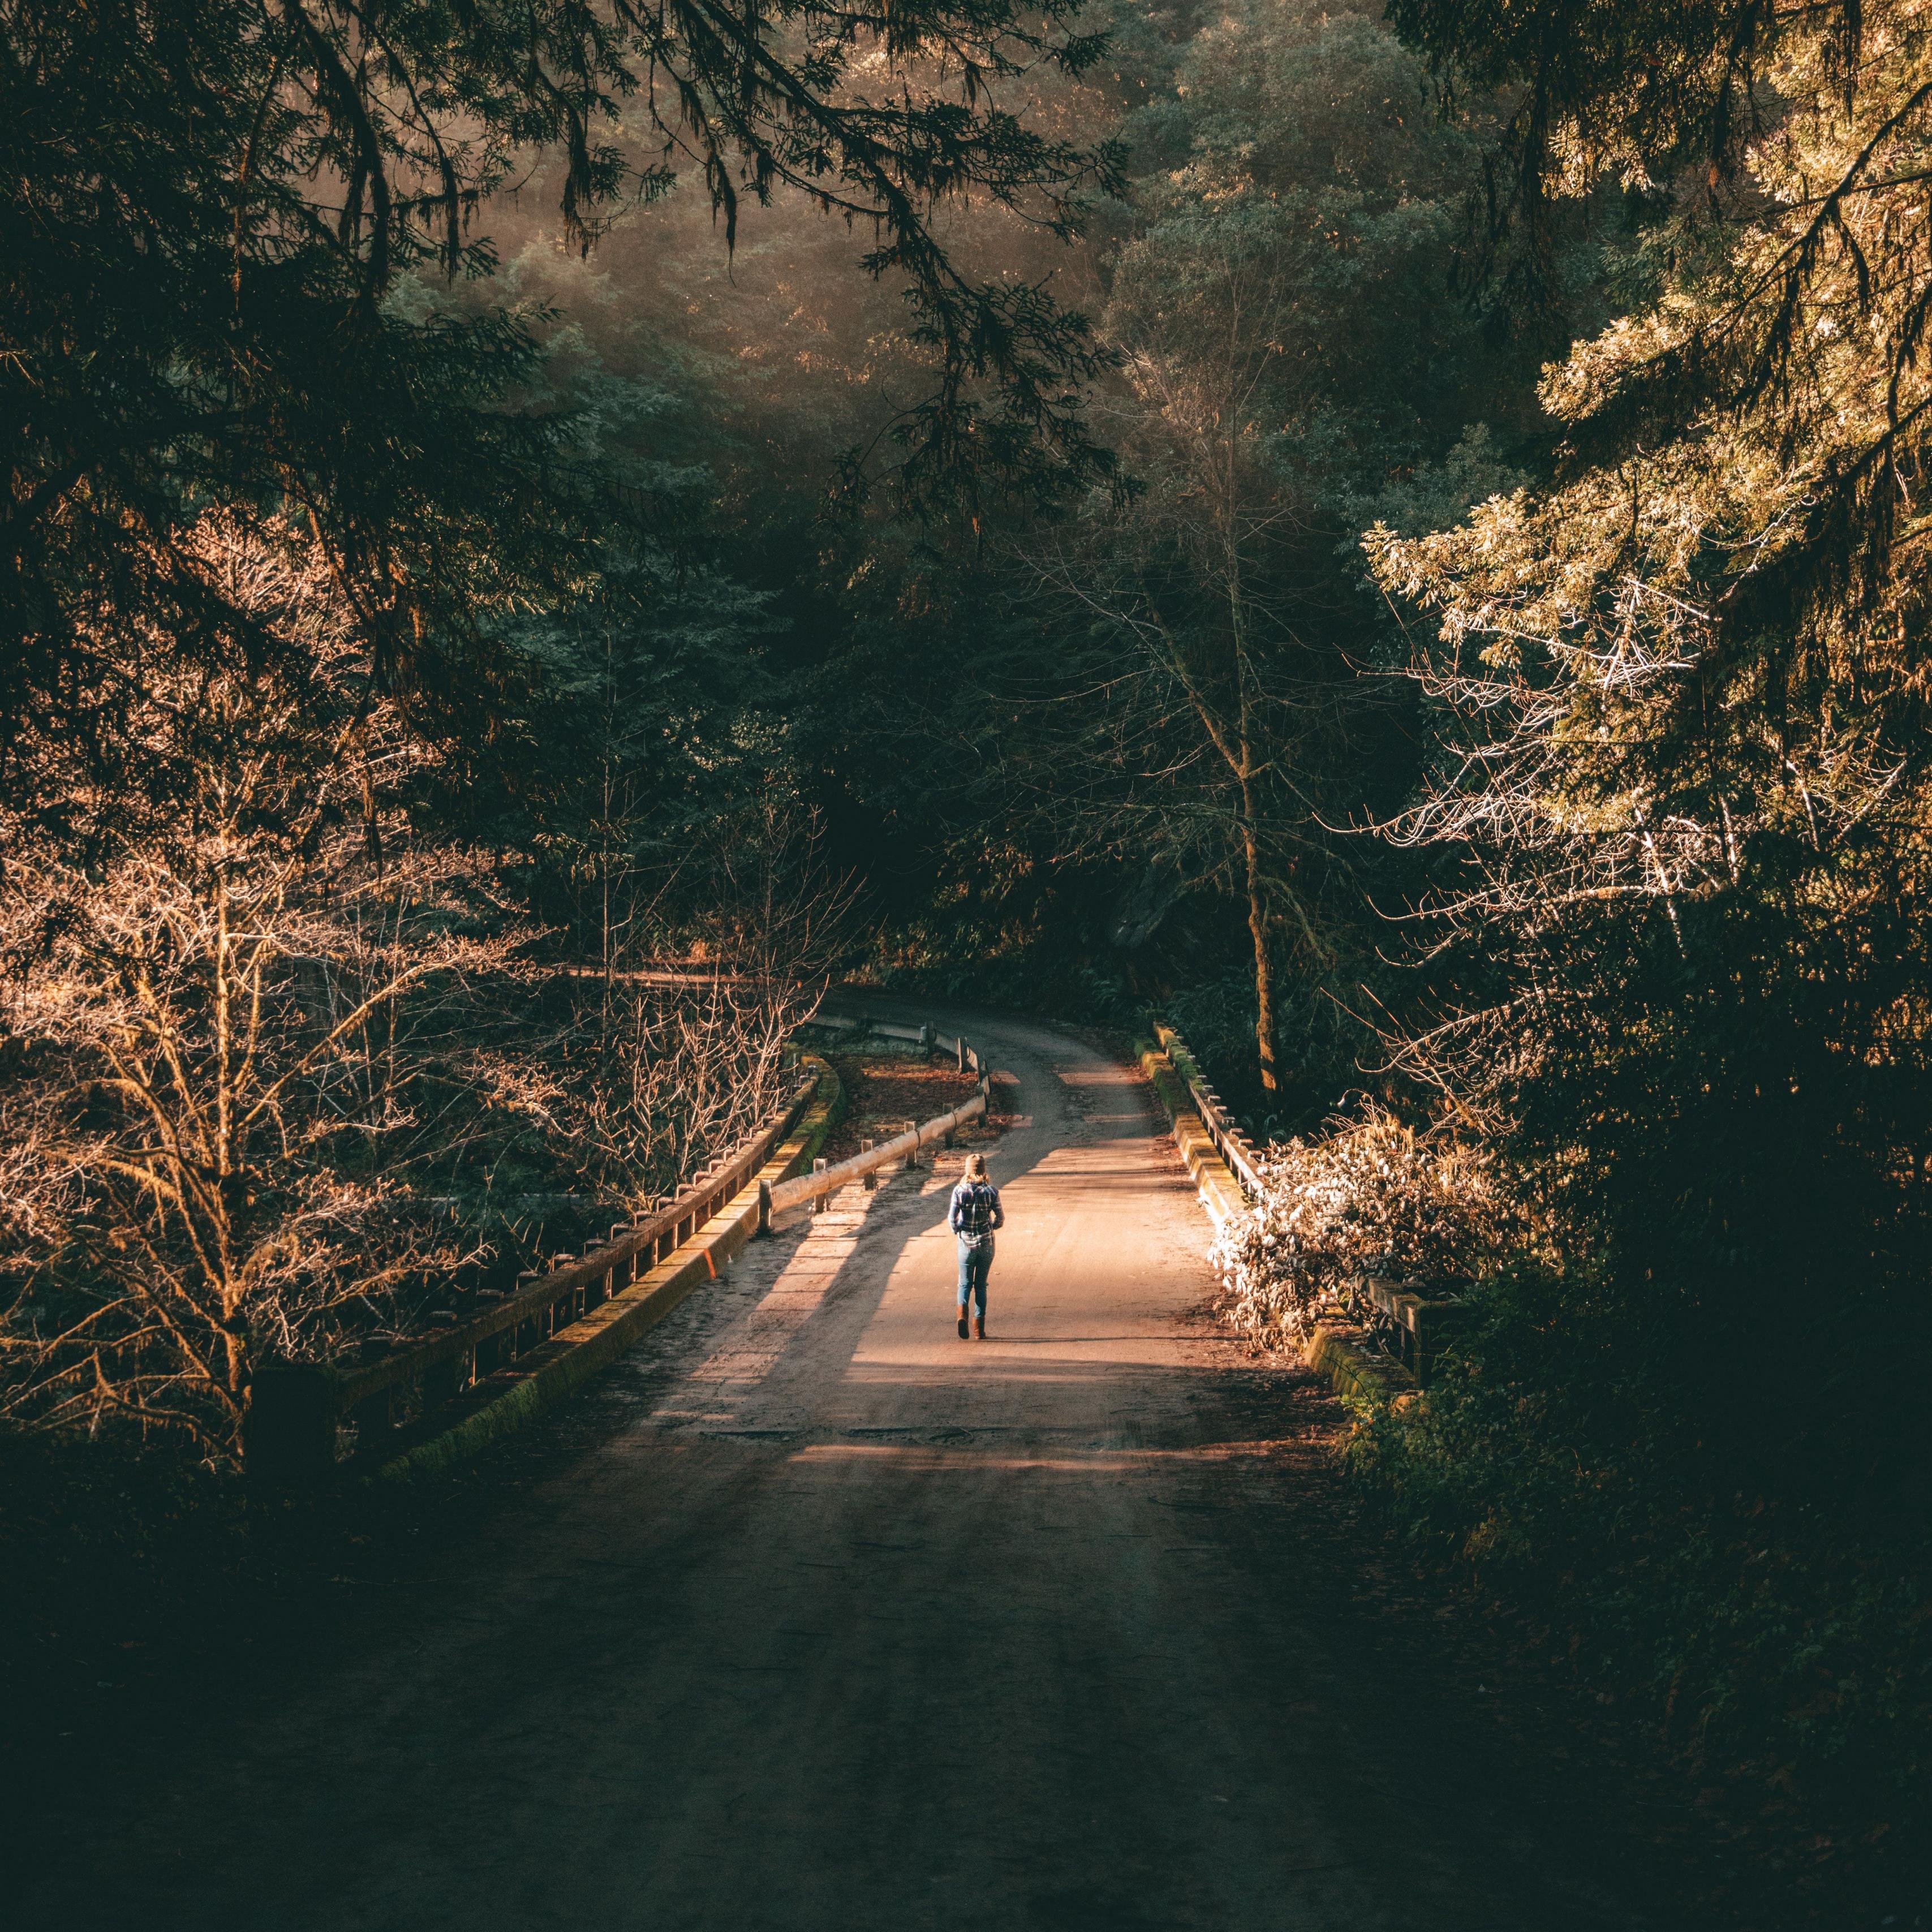 Download wallpaper 3415x3415 forest, road, man, lonely